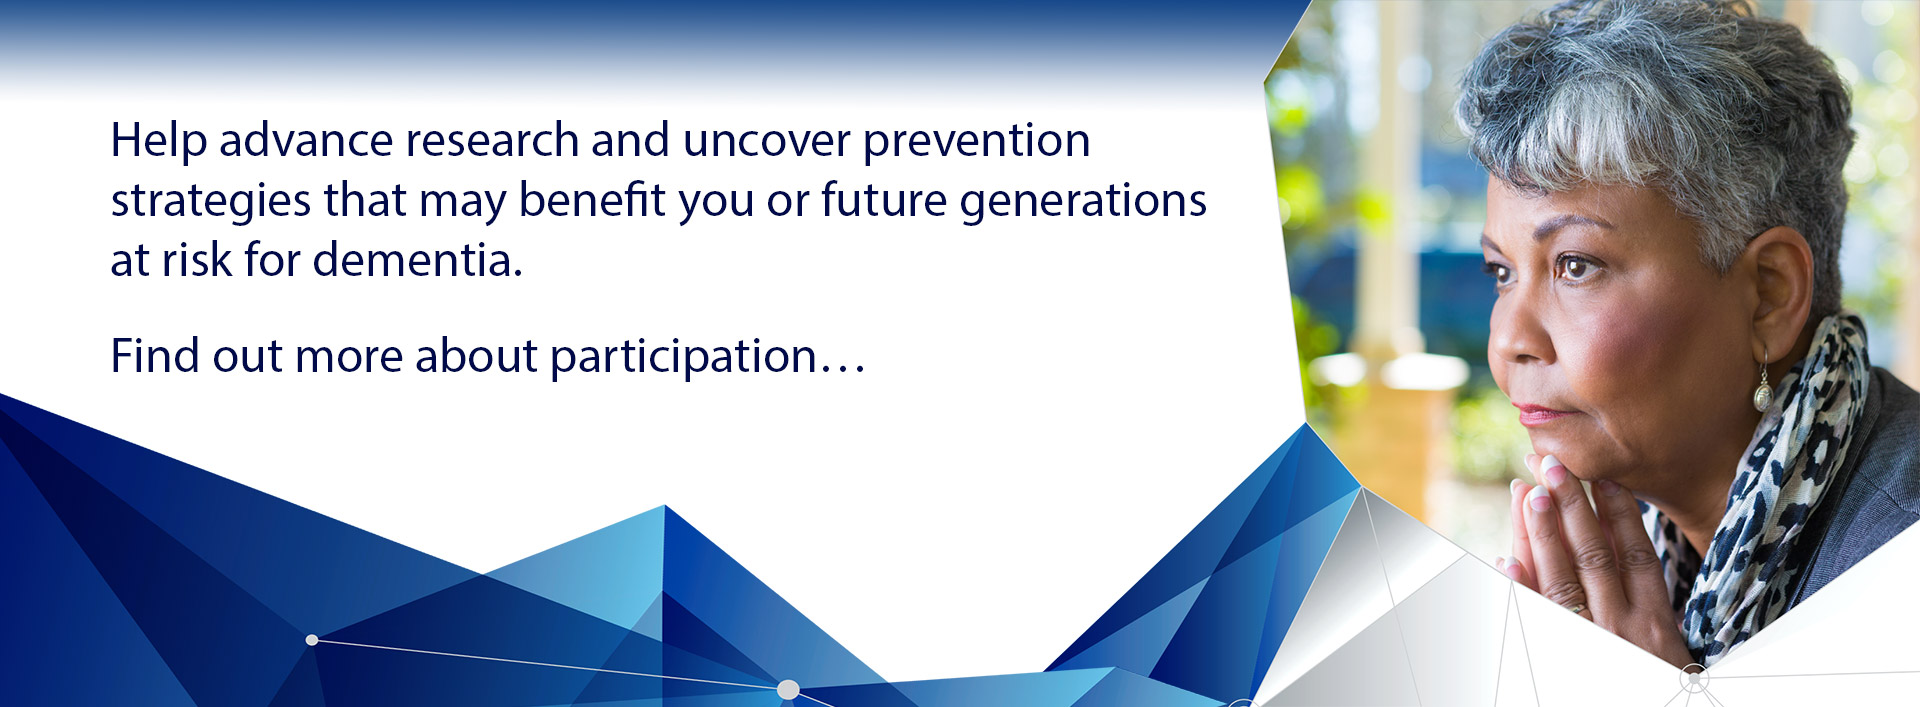 Help advance research and uncover prevention strategies that may benefit you or future generations at risk for dementia.